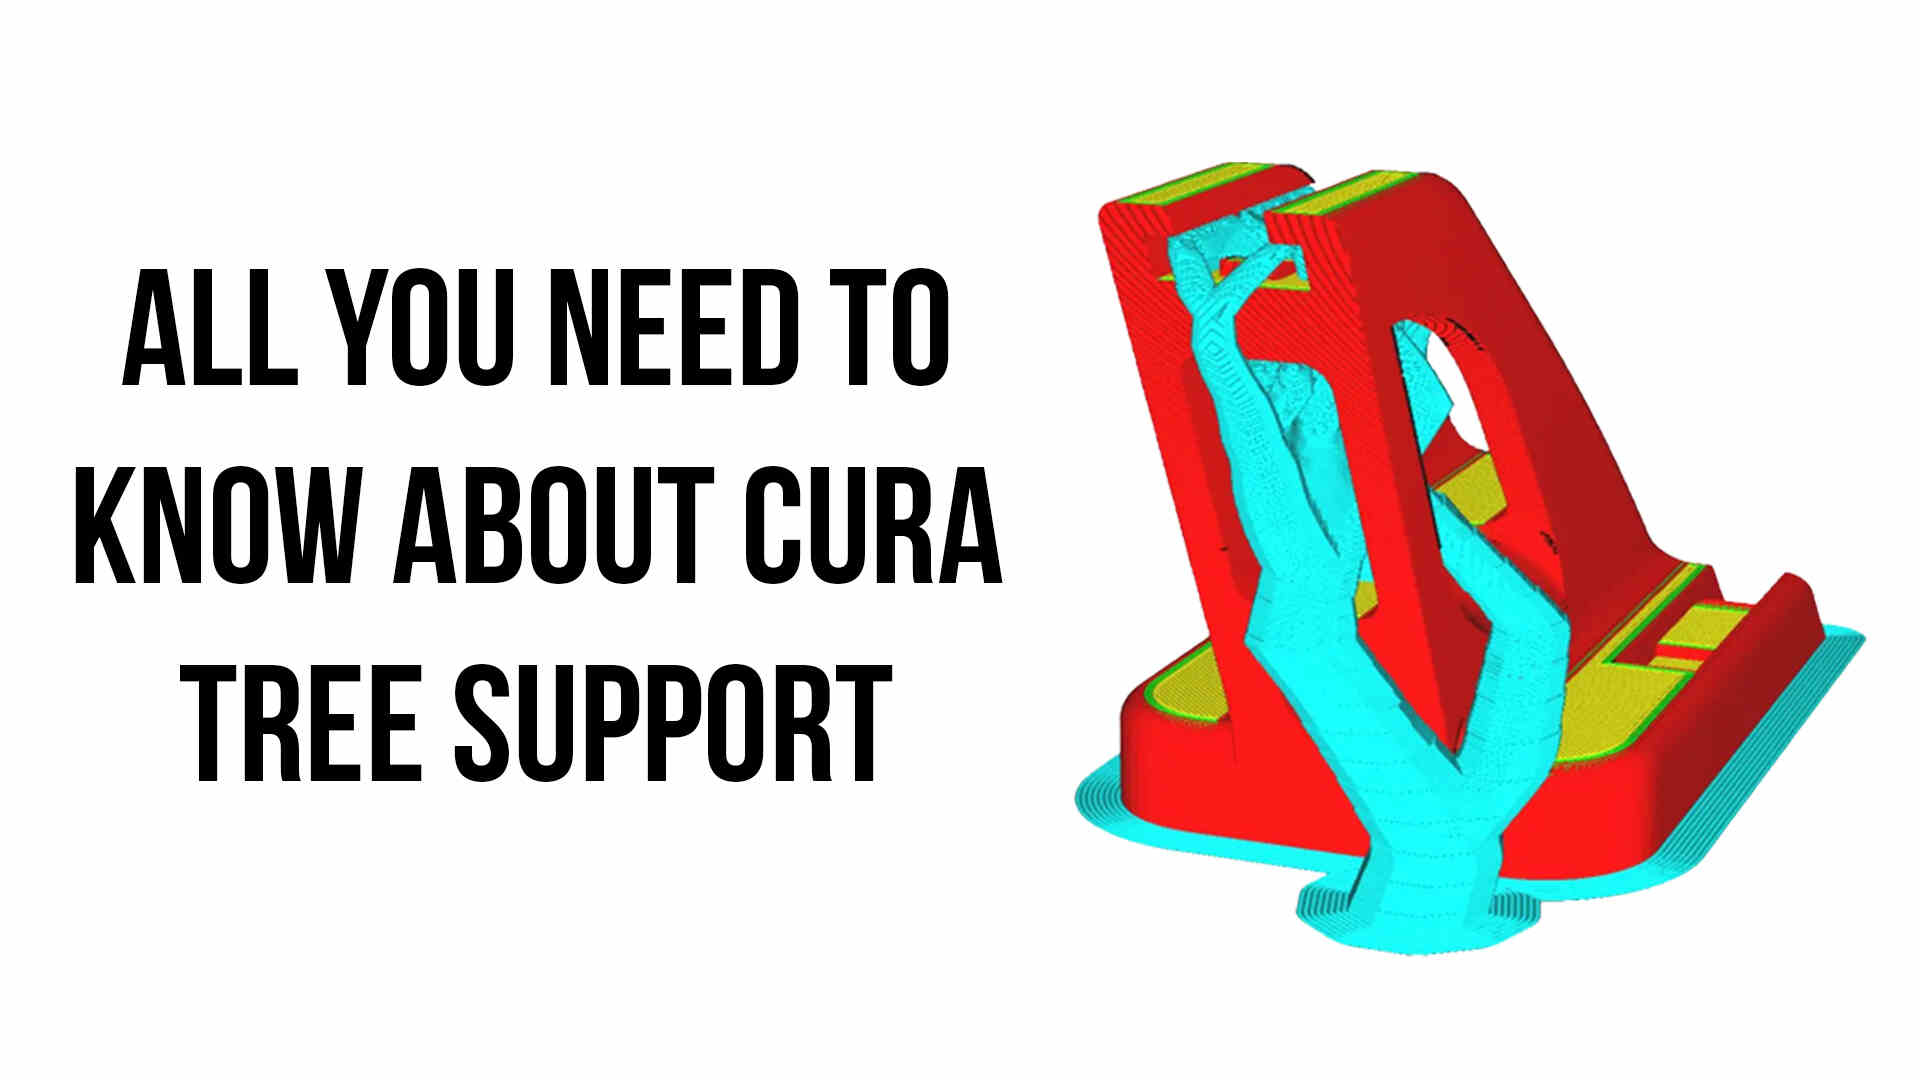 All You Need to Know About Cura Tree Support